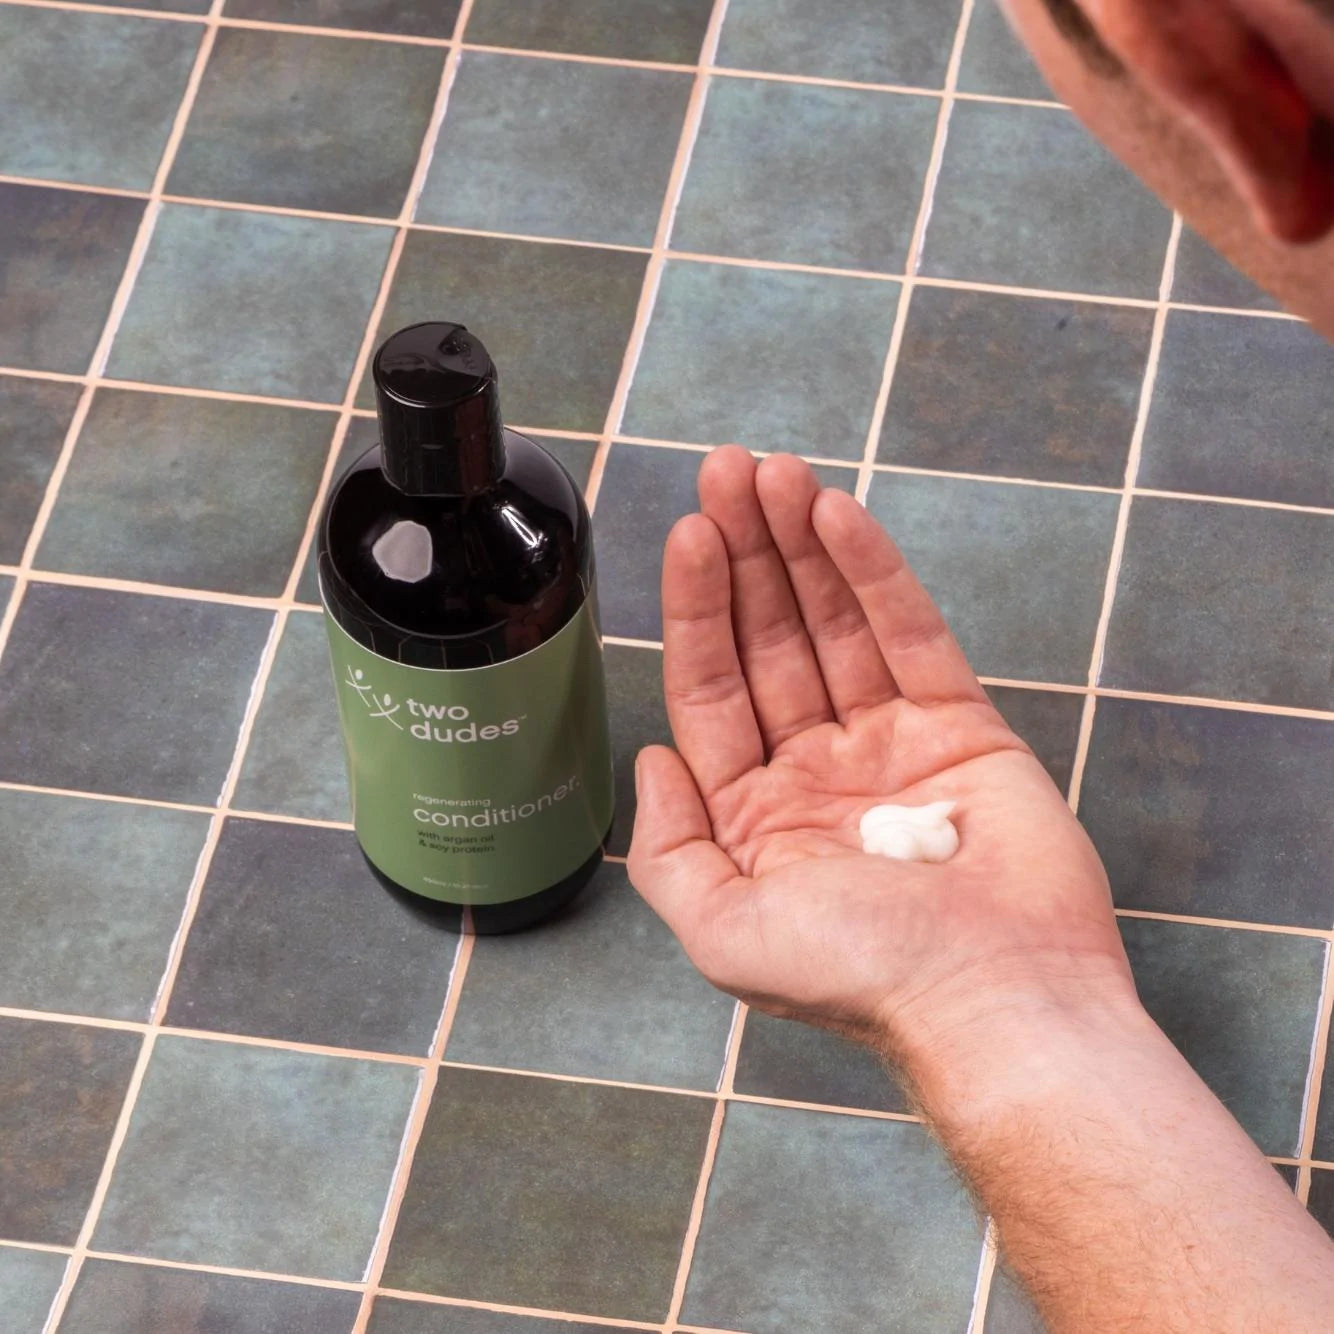 Dispensing a dollop of Two Dudes argan oil regenerating conditioner from a pump bottle onto an open palm over a tiled surface.